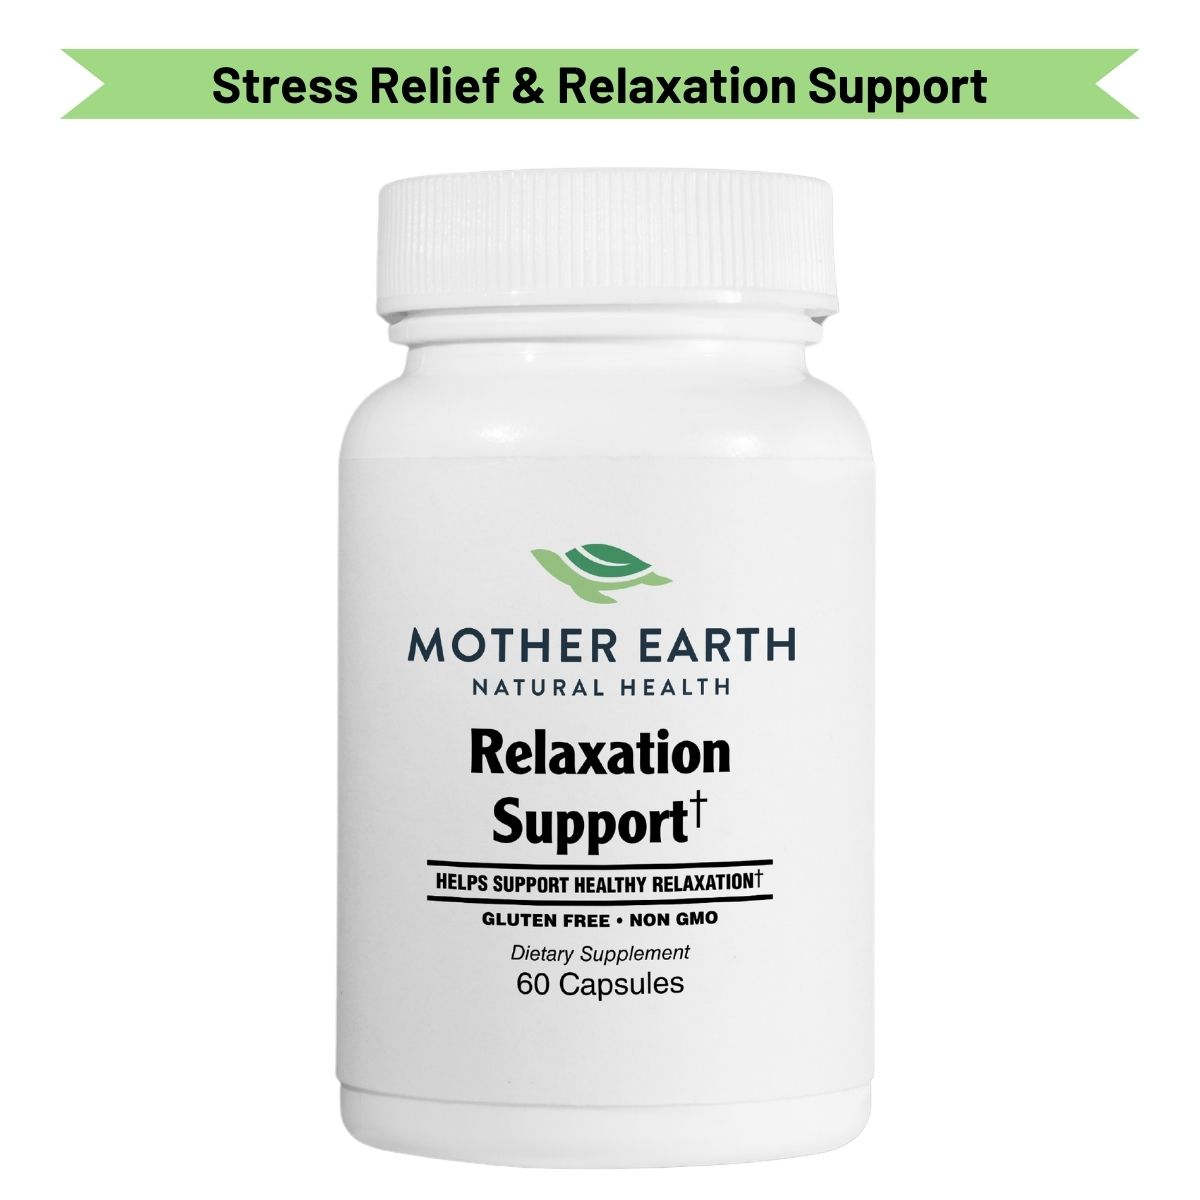 Mother Earth's Relaxation Support - Mother Earth